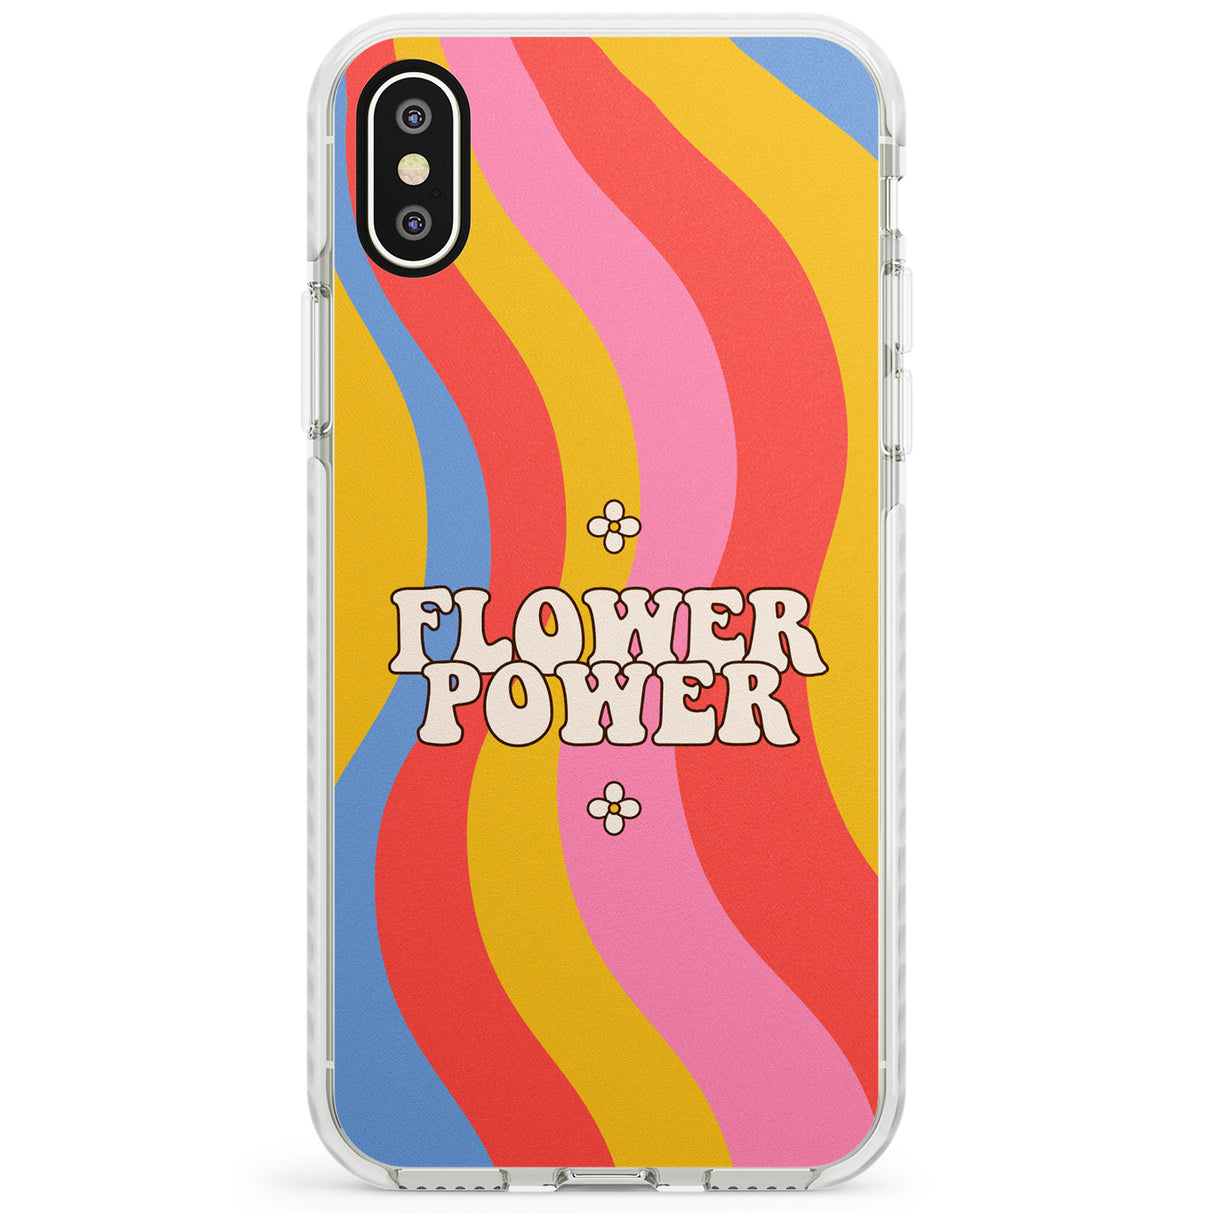 Melting Flower Power Impact Phone Case for iPhone X XS Max XR